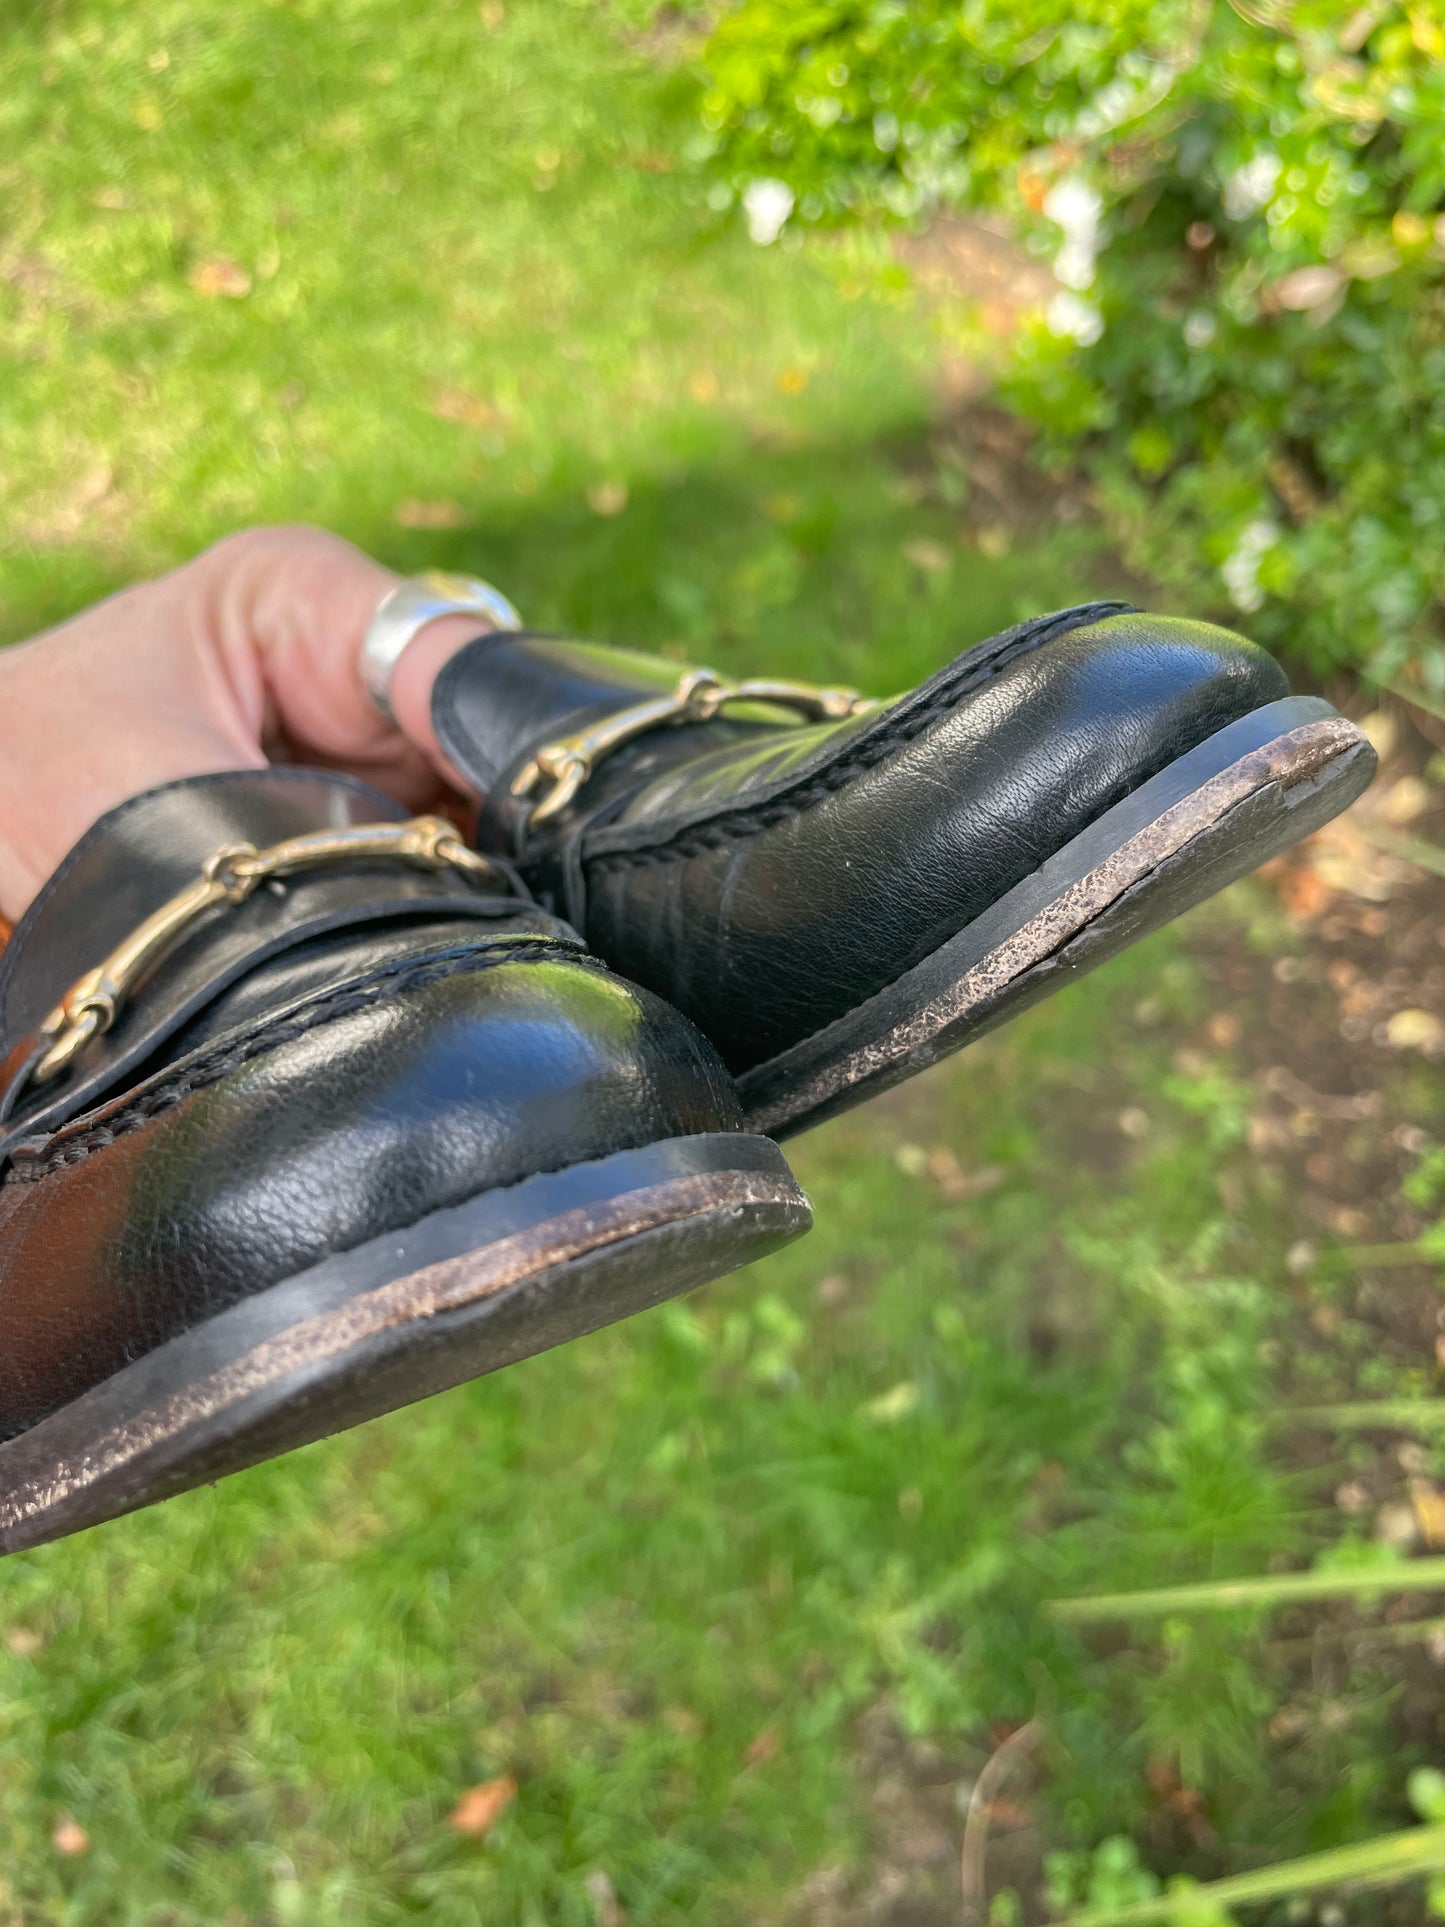 Vintage Russell & Bromley black leather Loafers size 6.5